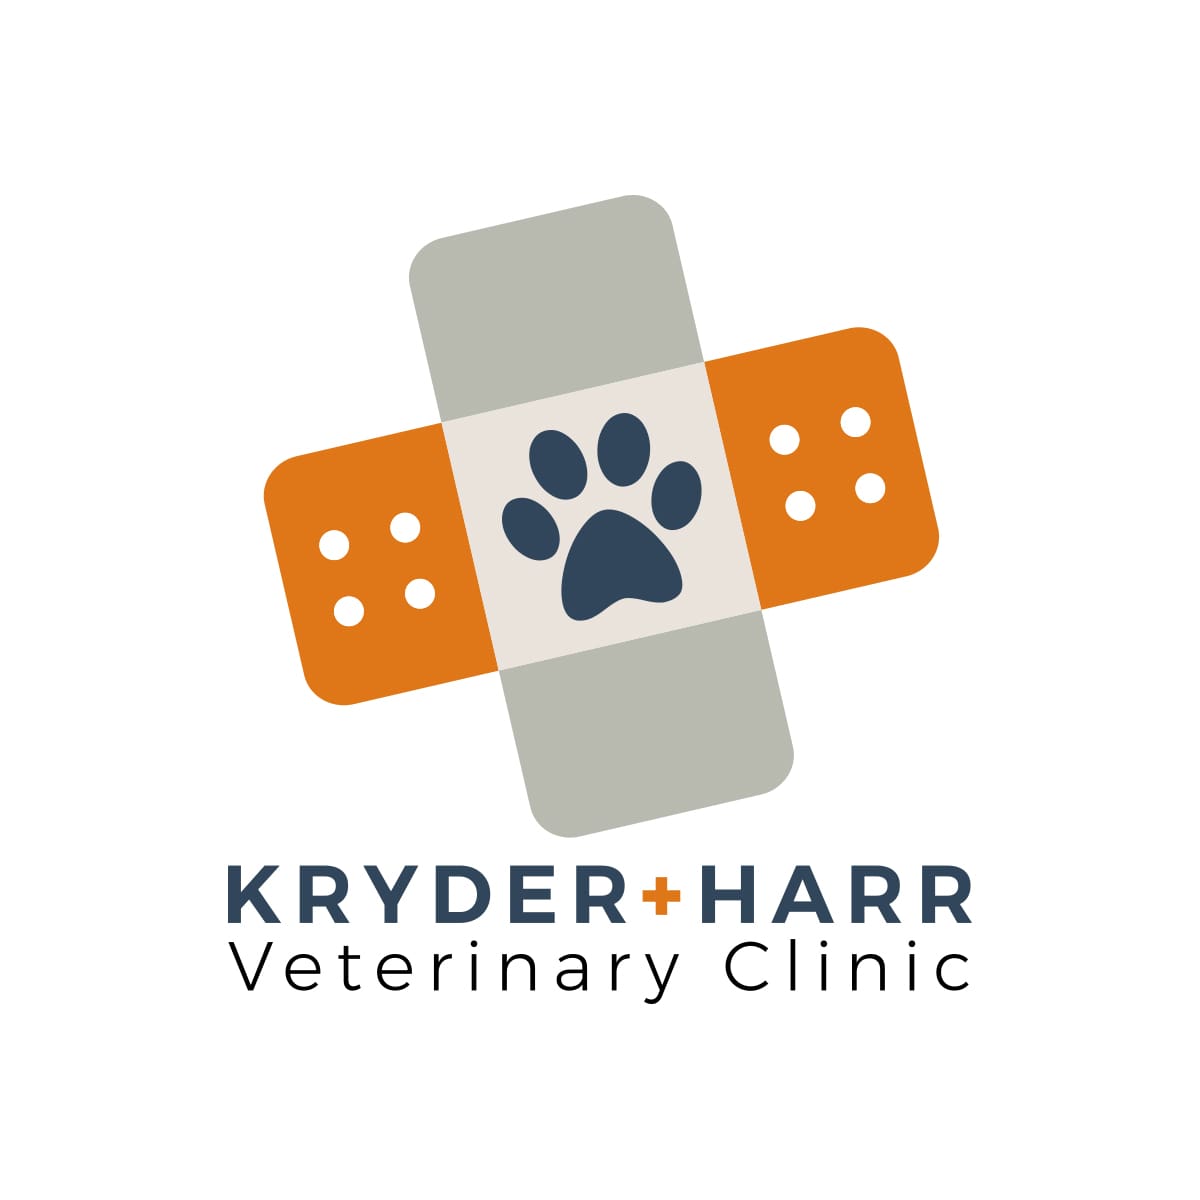 <span style="font-size: 21px;"><strong>Kryder + Harr<br> Veterinary Clinic</strong></span><br>
Logo design